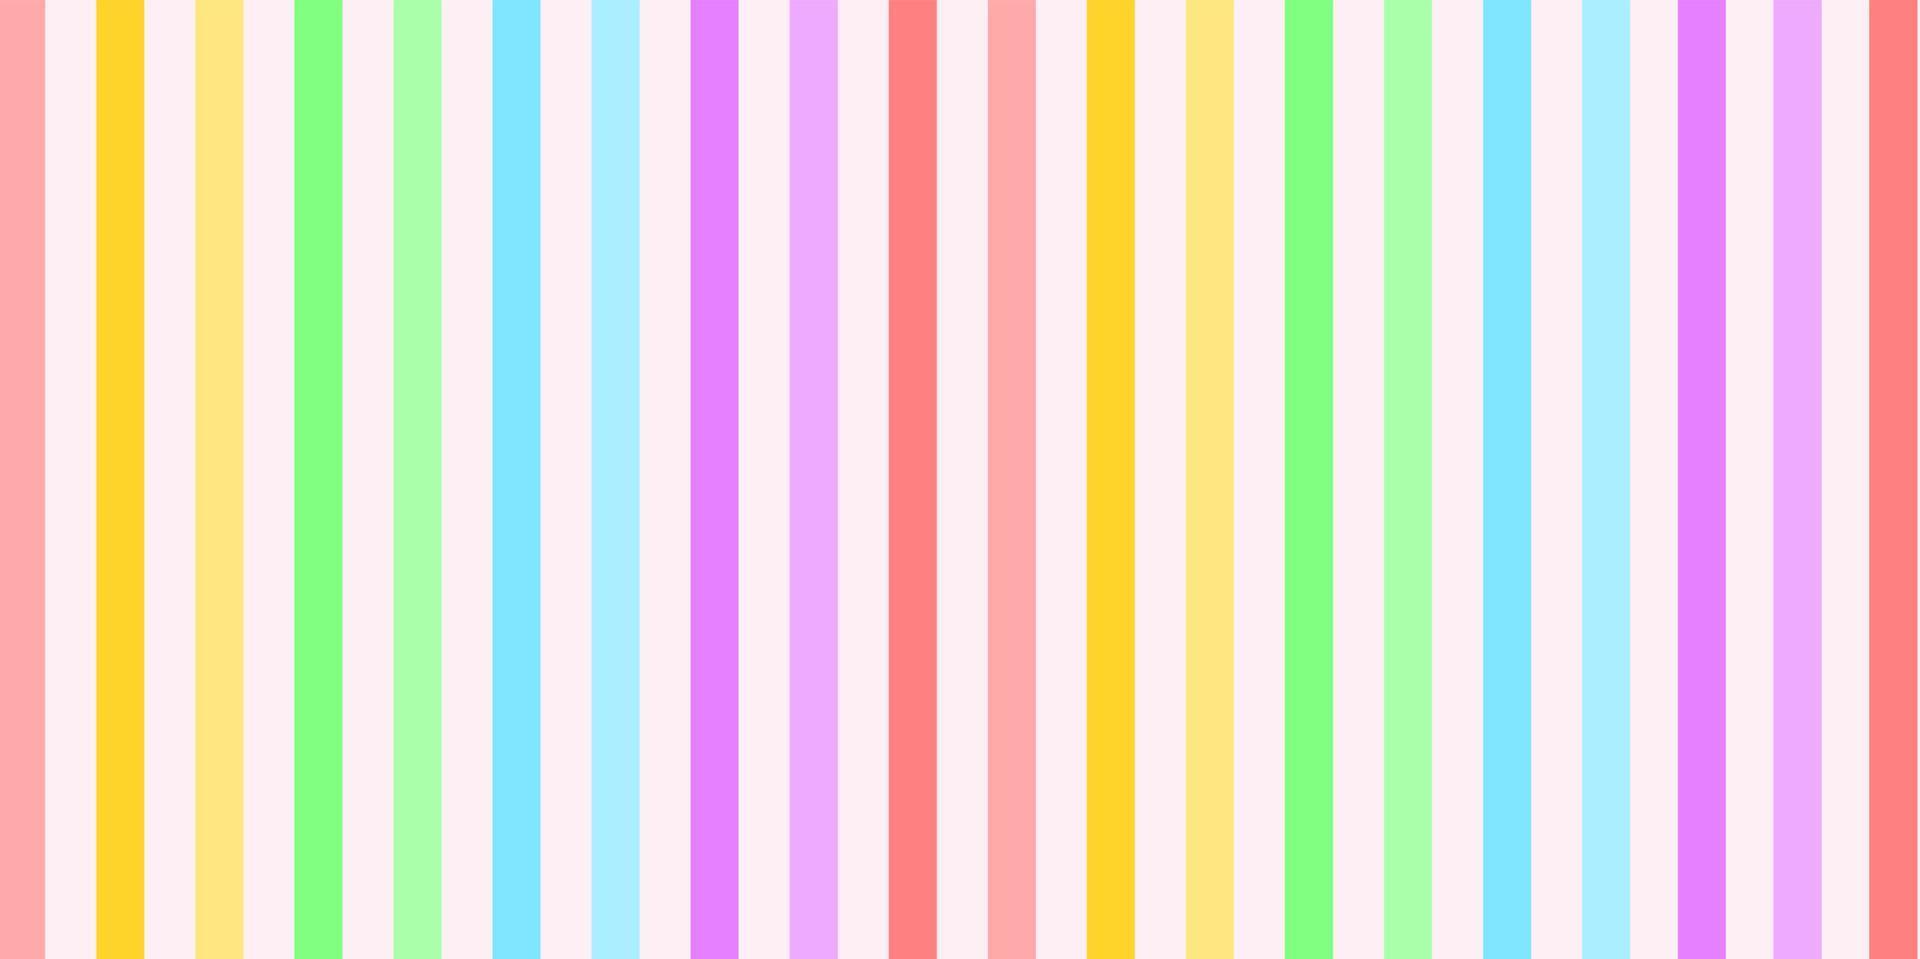 Rainbow color of vertical stripes, abstract background. Seamless pattern design. Paper, cloth, fabric, dress, napkin, cover, bed printing, gift, wrap. Matter, alternative, lgbtq, childish, playground. vector